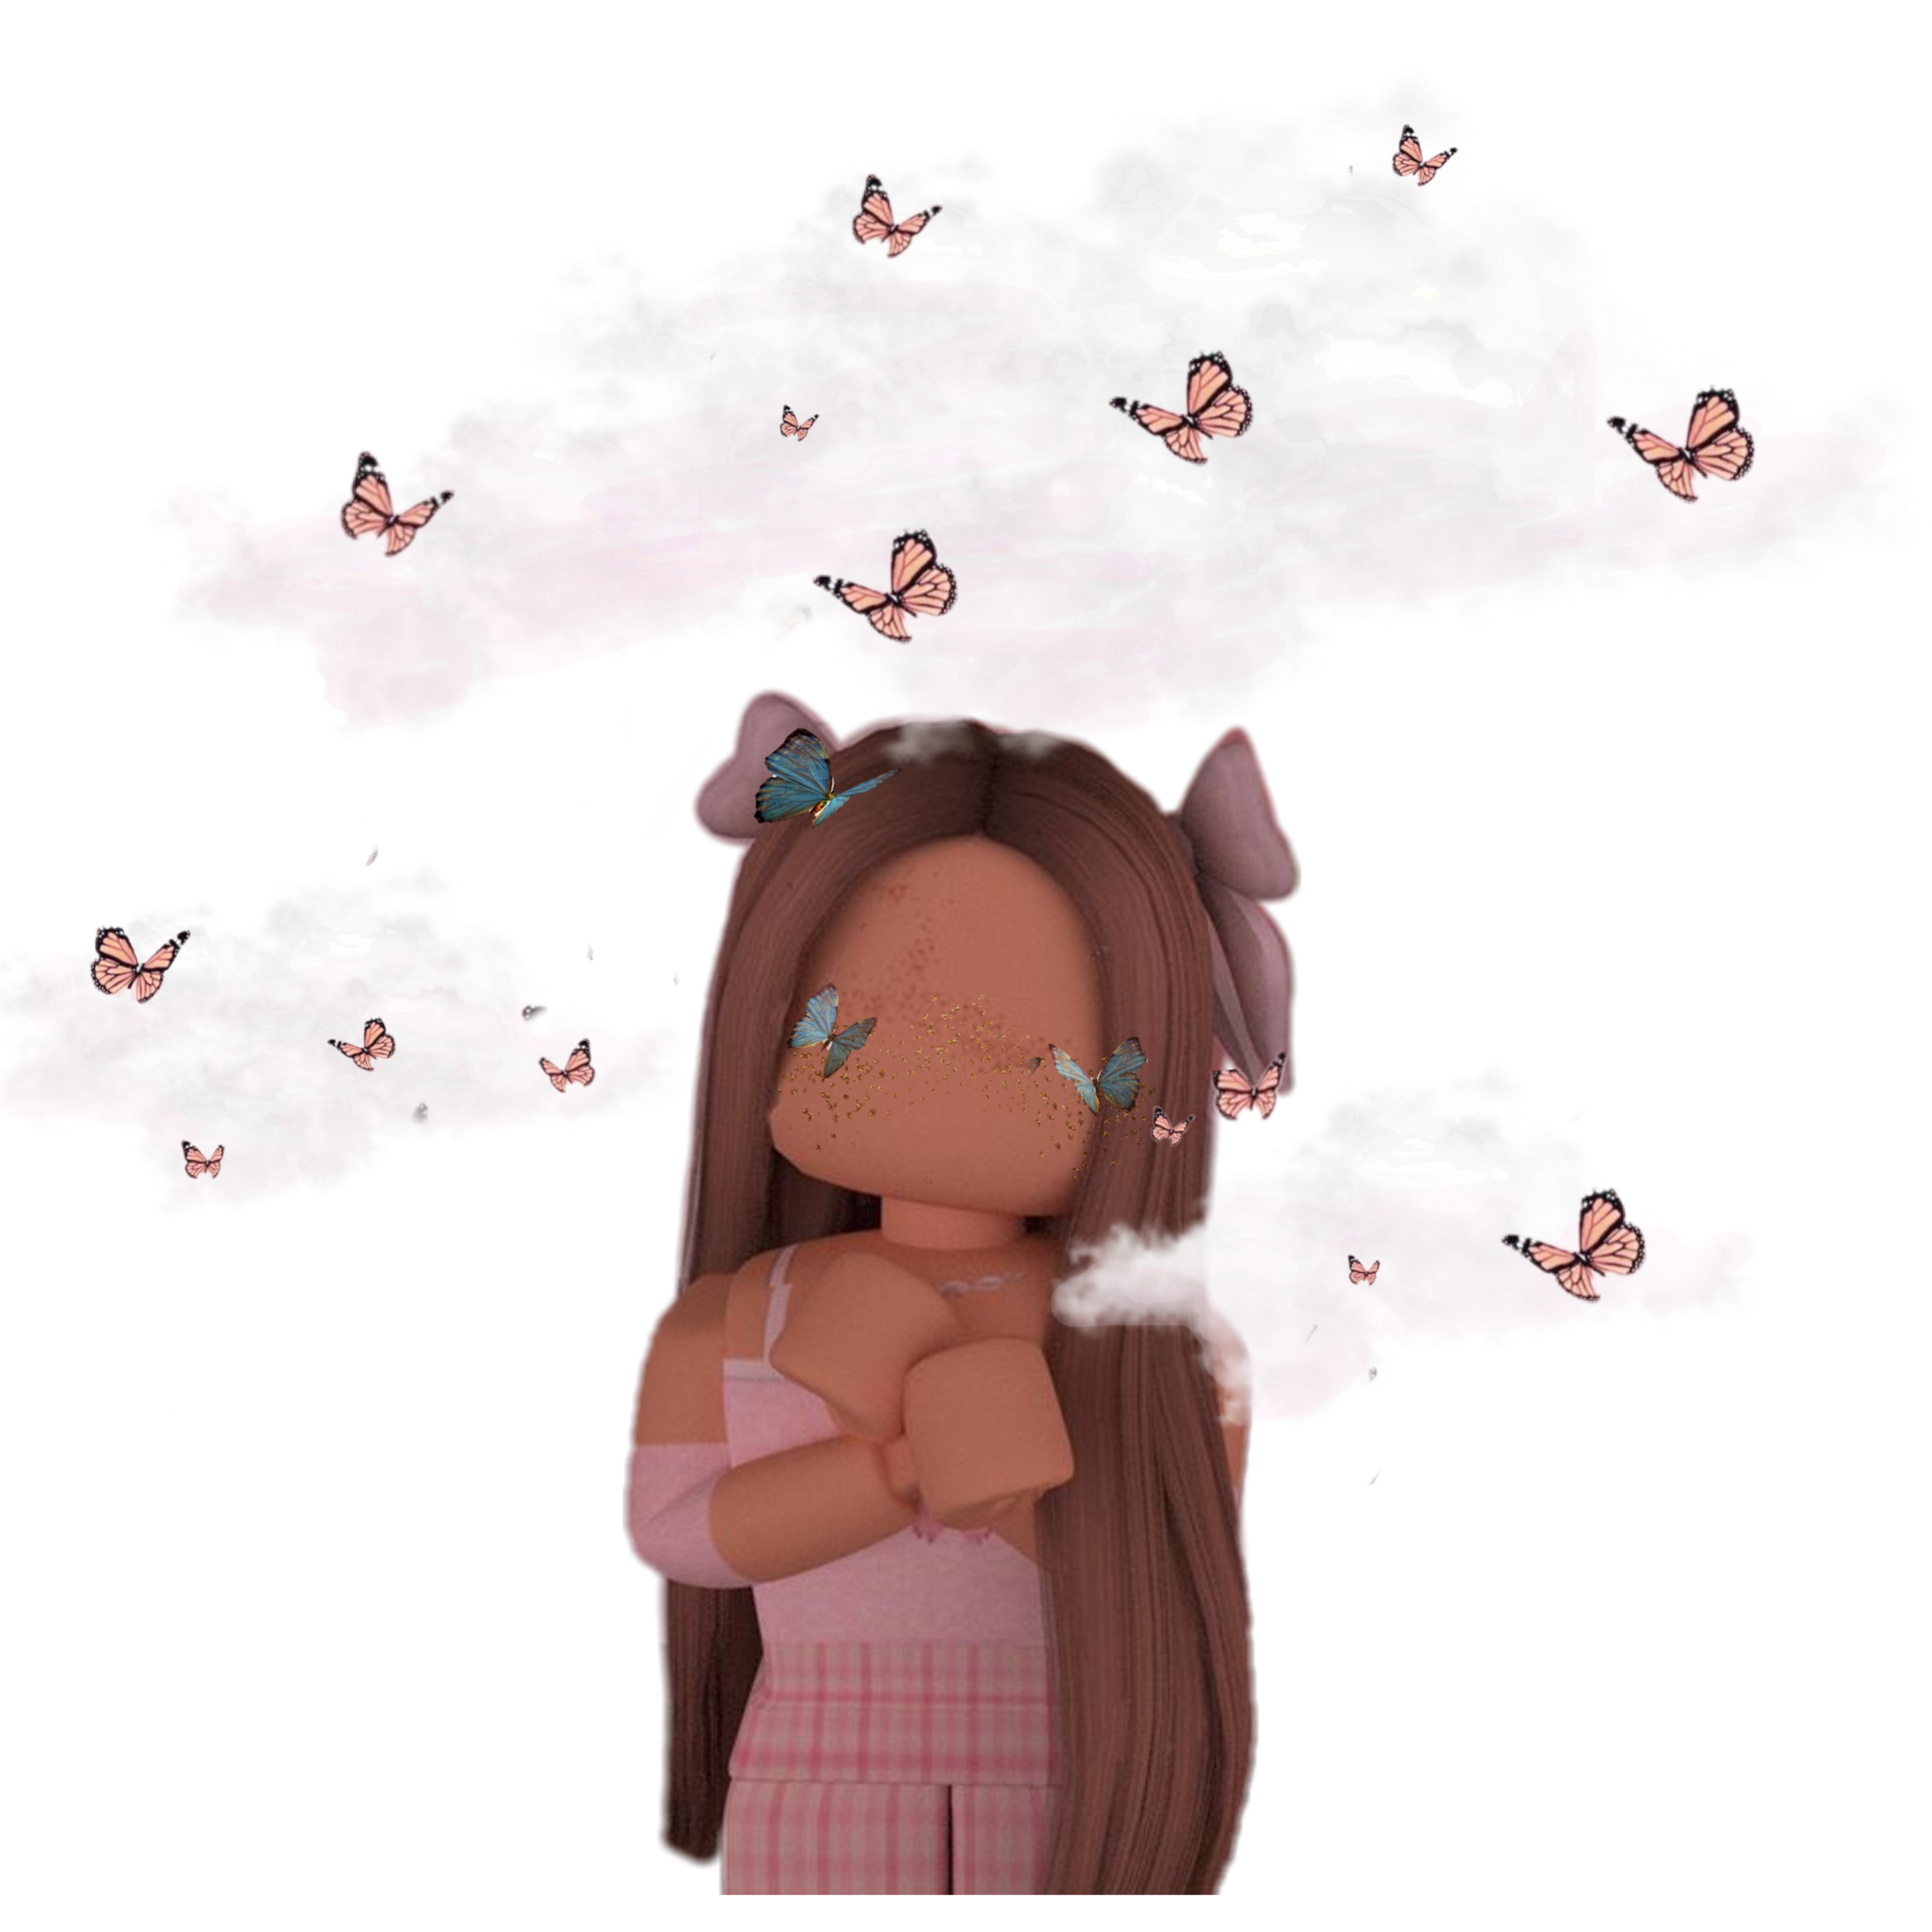 Sticker By 𝒜ℯ𝓈𝓉𝒽ℯ𝓉𝒾𝒸𝓈 By 𝓁ℯ𝓍𝒾 - aesthetic roblox girl pictures